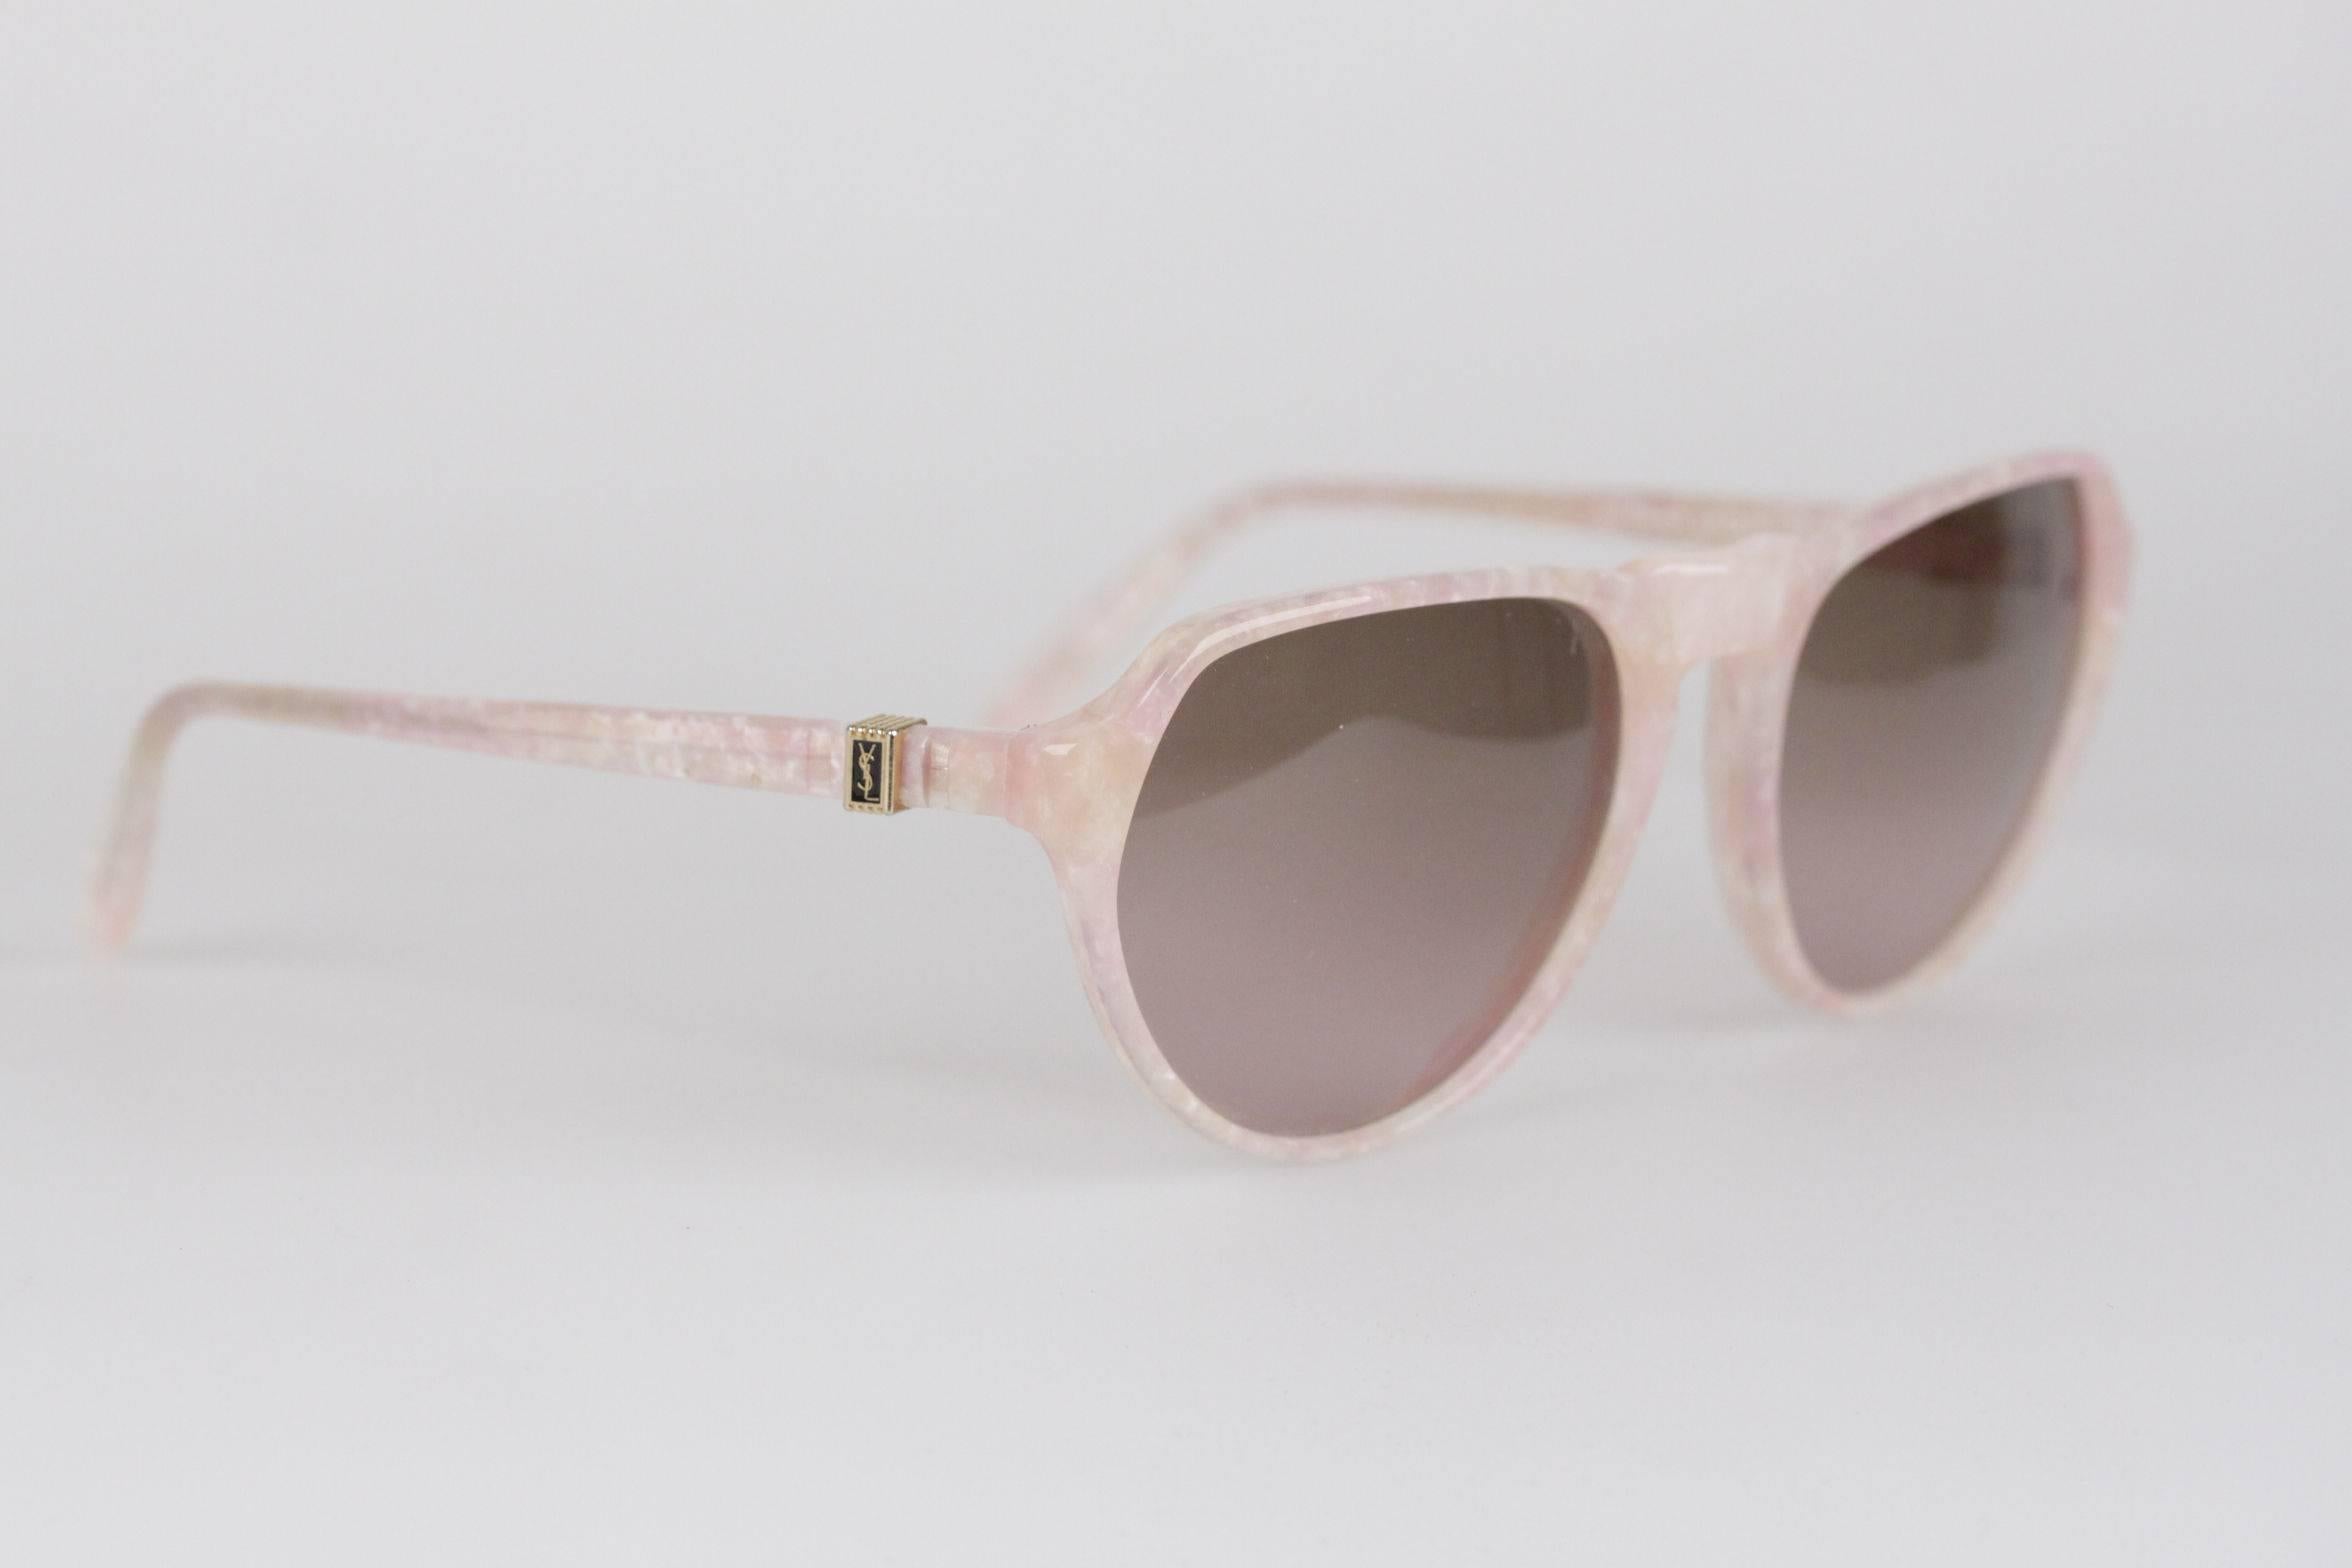 - Vintage YVES SAINT LAURENT sunglasses, Made in France

- mod: PRIAM - 58/16 - 378

- Pink Marbled frame

- Light Brown MINT 100% UV GRADIENT lens

- Made in France

Any other detail which is not mentioned may be seen on the item